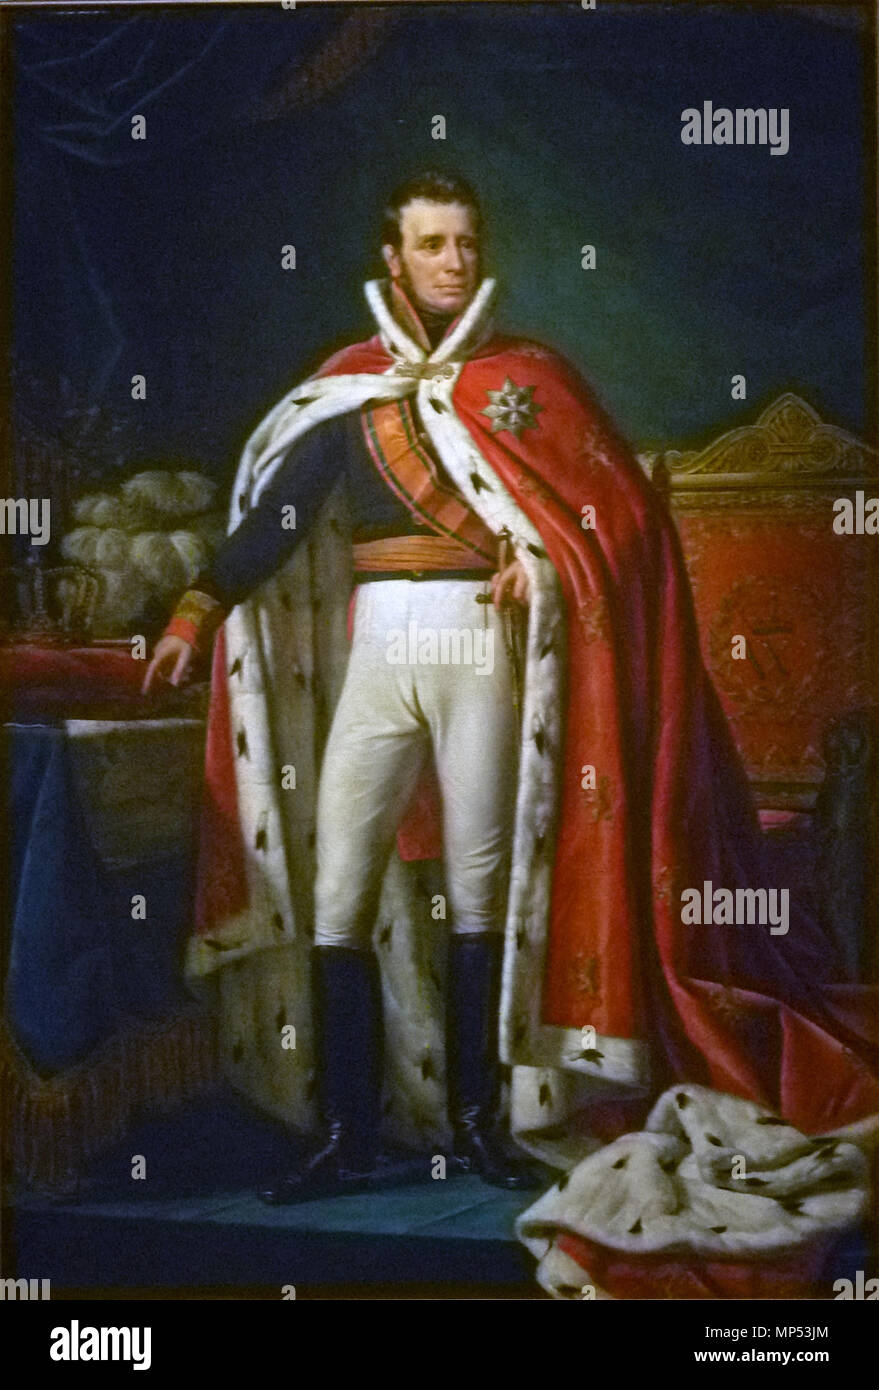 Portrait of William I, King of the Netherlands. Portrait of William I (1772–1743) as King of the United Kingdom of the Netherlands. Standing, at full-length, in the gala uniform of a general. Over his right shoulder the sash of the Military William Order. Over his uniform wearing a red robe lined with ermine. To the right the royal throne, to the left a table with on it the map of parts of Java (Bantam, Jacatra and Cheribon) in modern-day Indonesia, and also a pillow with crown and sceptre and a hat with ostriche feathers. 1819.   742 Joseph Paelinck - Willem I 001 Stock Photo